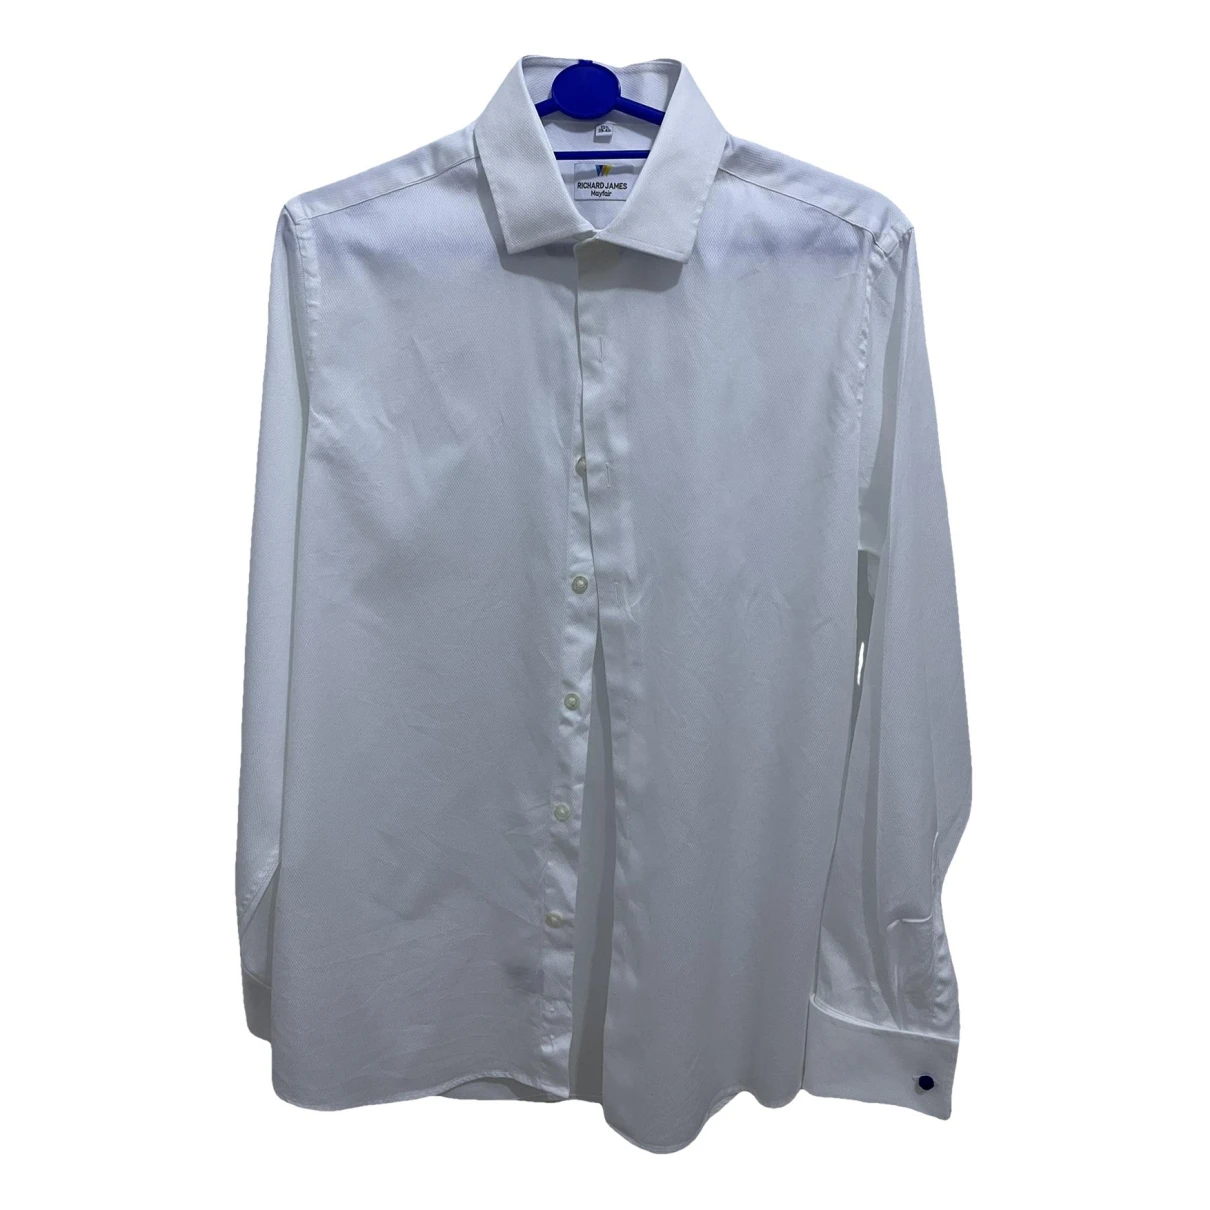 clothing Richard James shirts for Male Cotton 15.5 UK - US (tour de cou / collar). Used condition